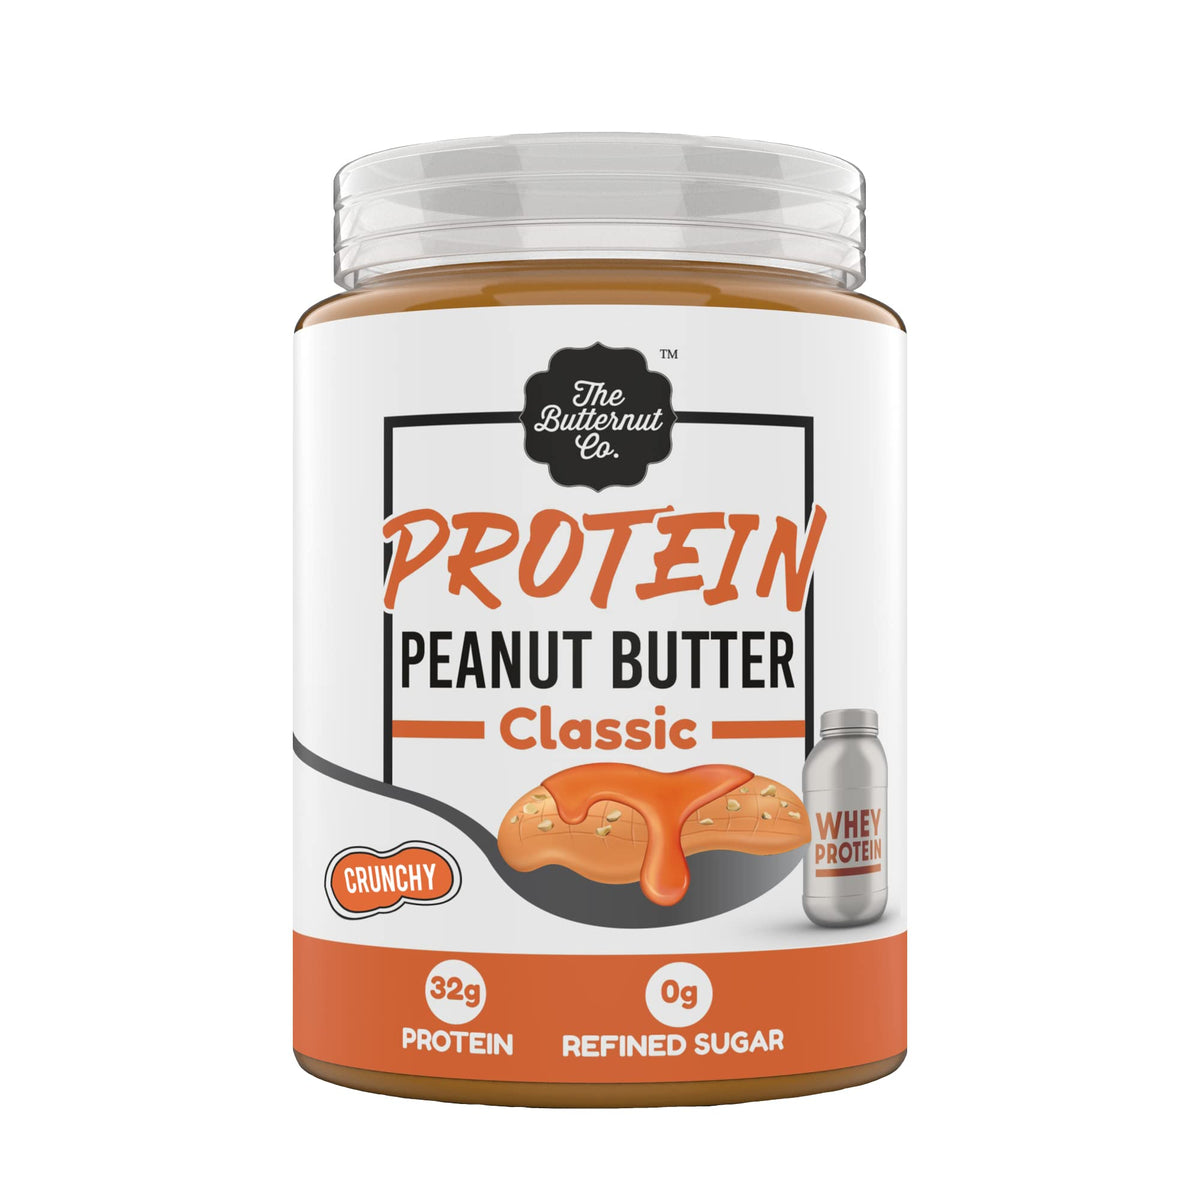 The Butternut Co. Protein Peanut Butter Classic, Crunchy 925 Gm (32G Protein, No Refined Sugar, Whey Protein Isolate)